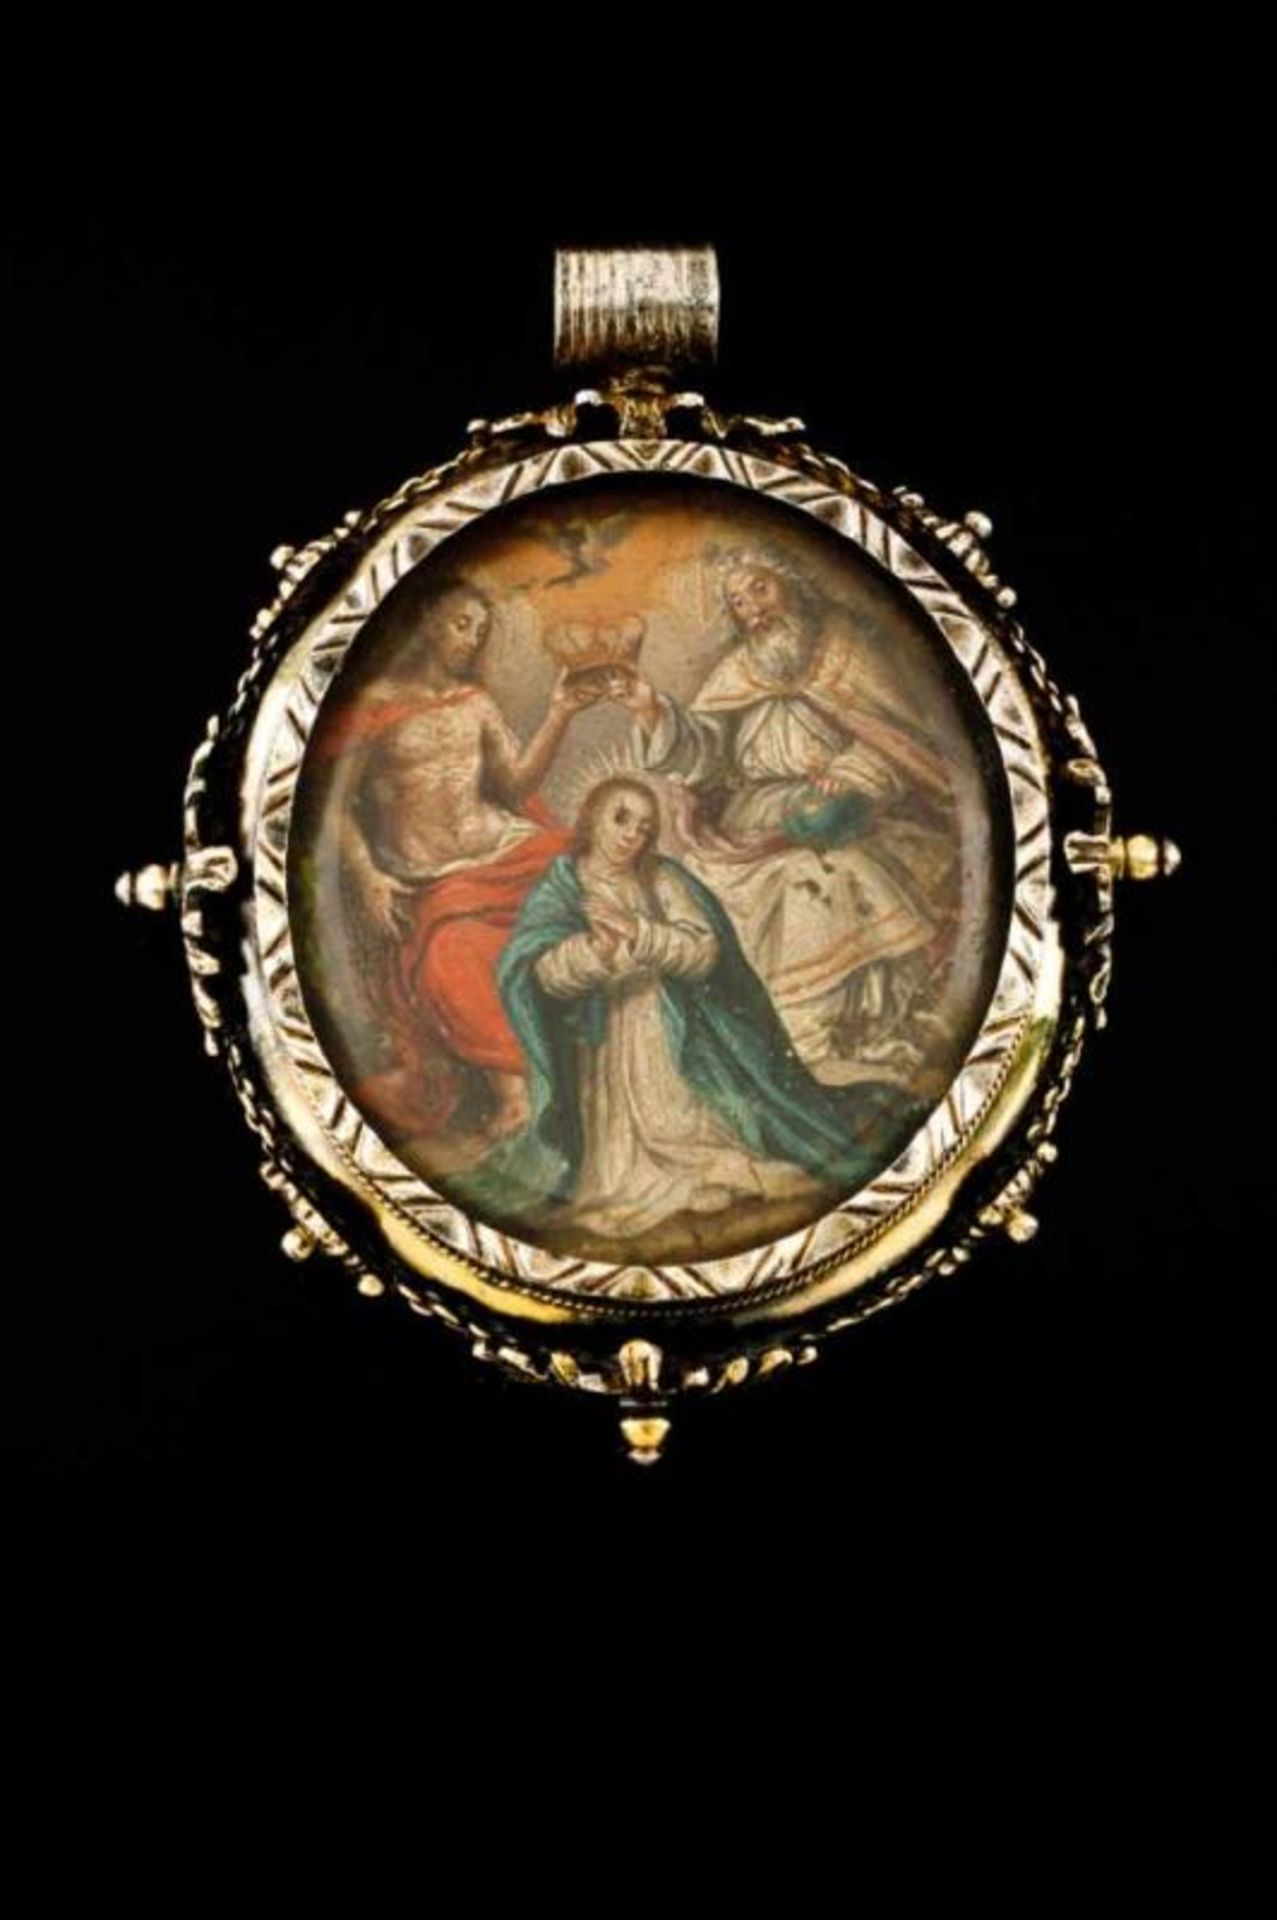 A Mannerist style medallion Silver gilt decorated in relief with floral clusters and geometric